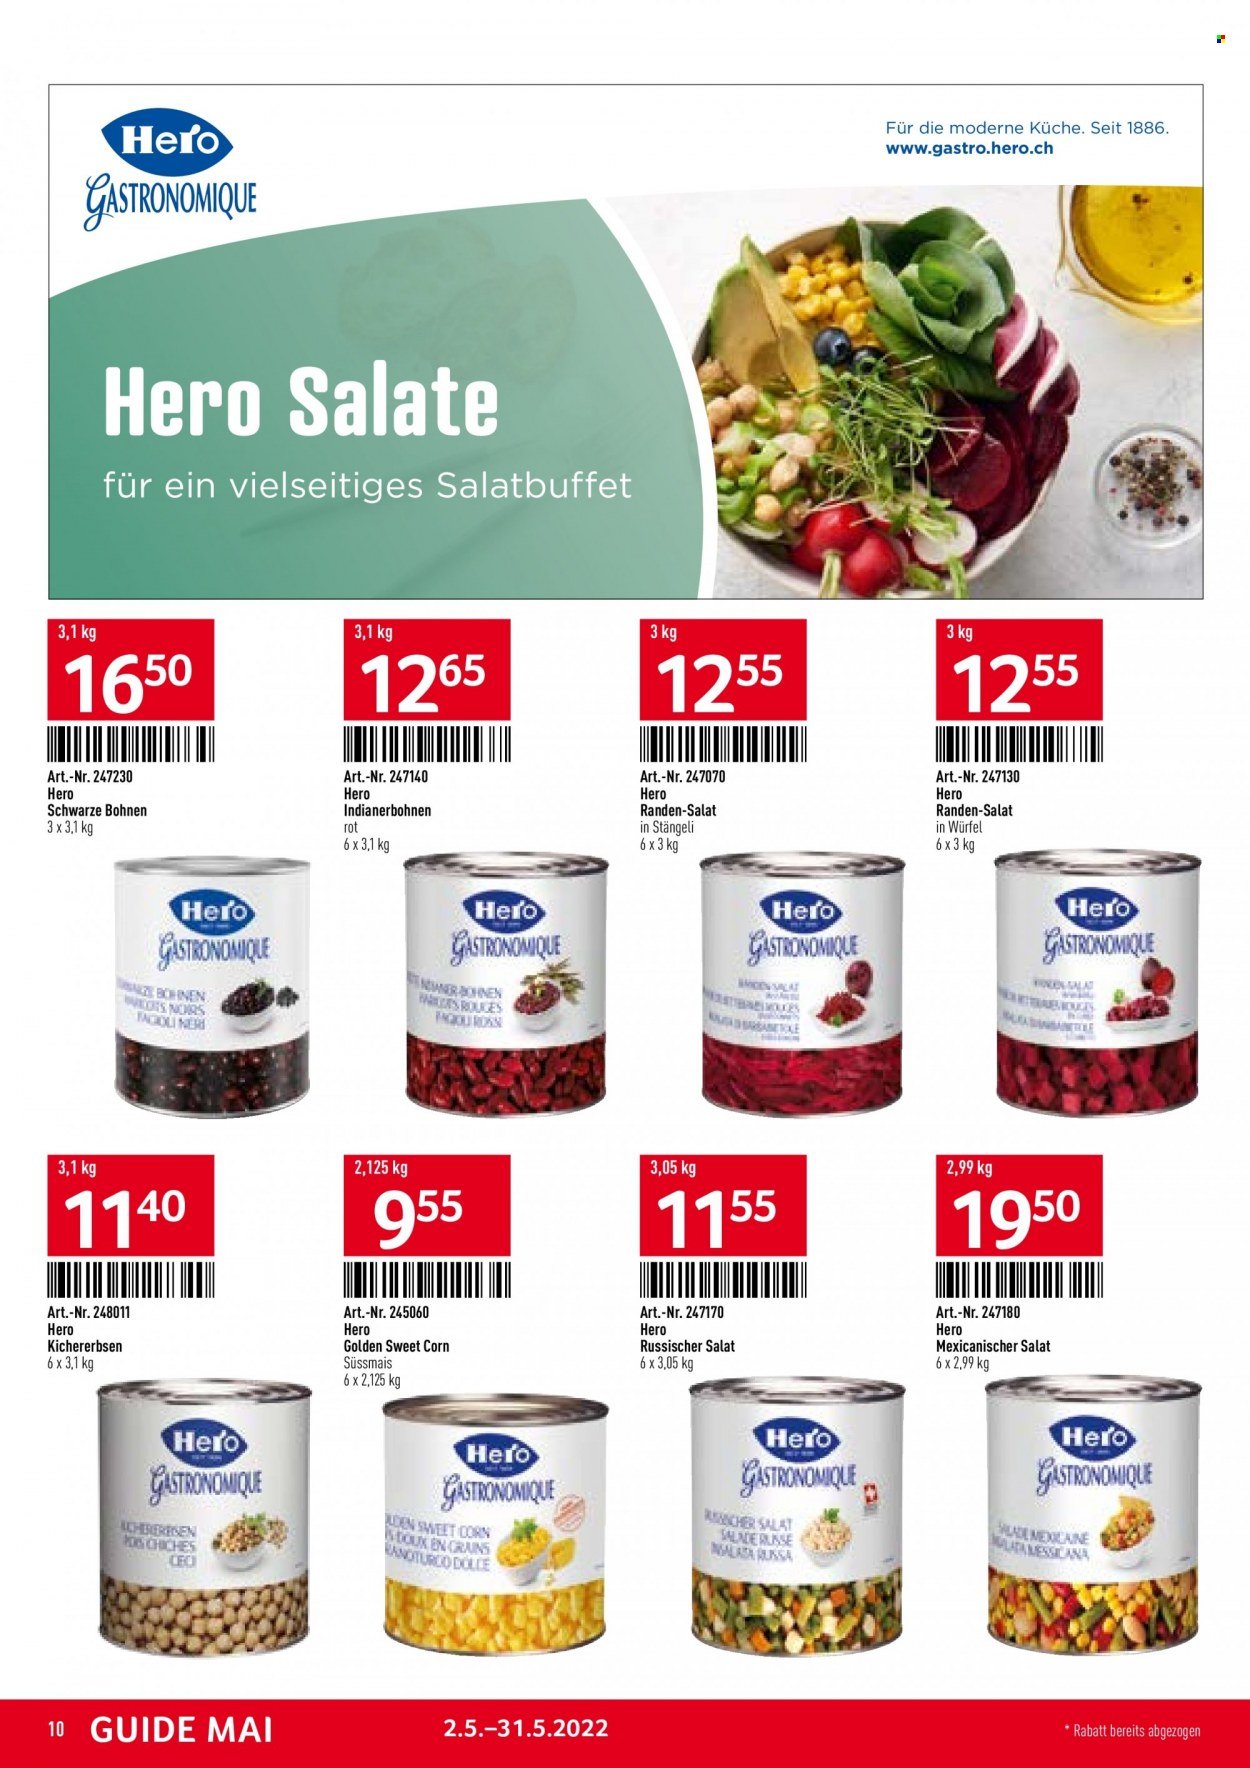 Catalogue TransGourmet - 2.5.2022 - 31.5.2022. Page 10.